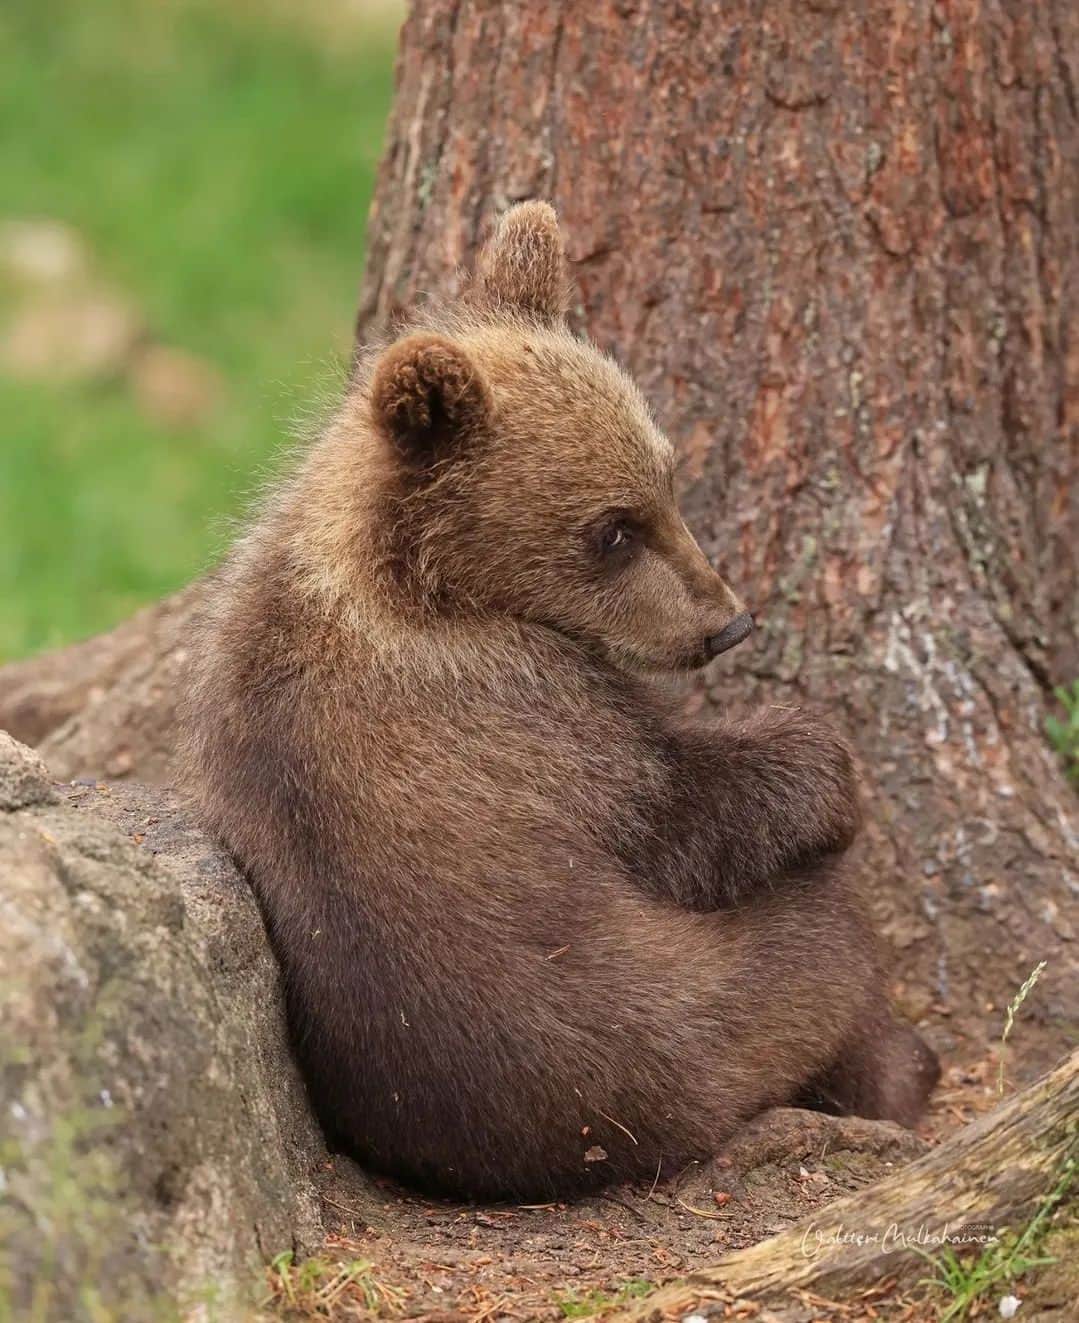 Bearsのインスタグラム：「I'm wondering what 2023 might bring to us! What are your plans and wishes for the new year? 🐻🐾♥   📸 credits: @valtterimulkahainen  #bear #bears #bearcub #cub #animal #animals #saveourbears #bearlove #savetheanimals #love #cute #sweet #adorable #nature #photo #wildlife #photography #wildlifephotography #lovely #animallove #belovedbears」